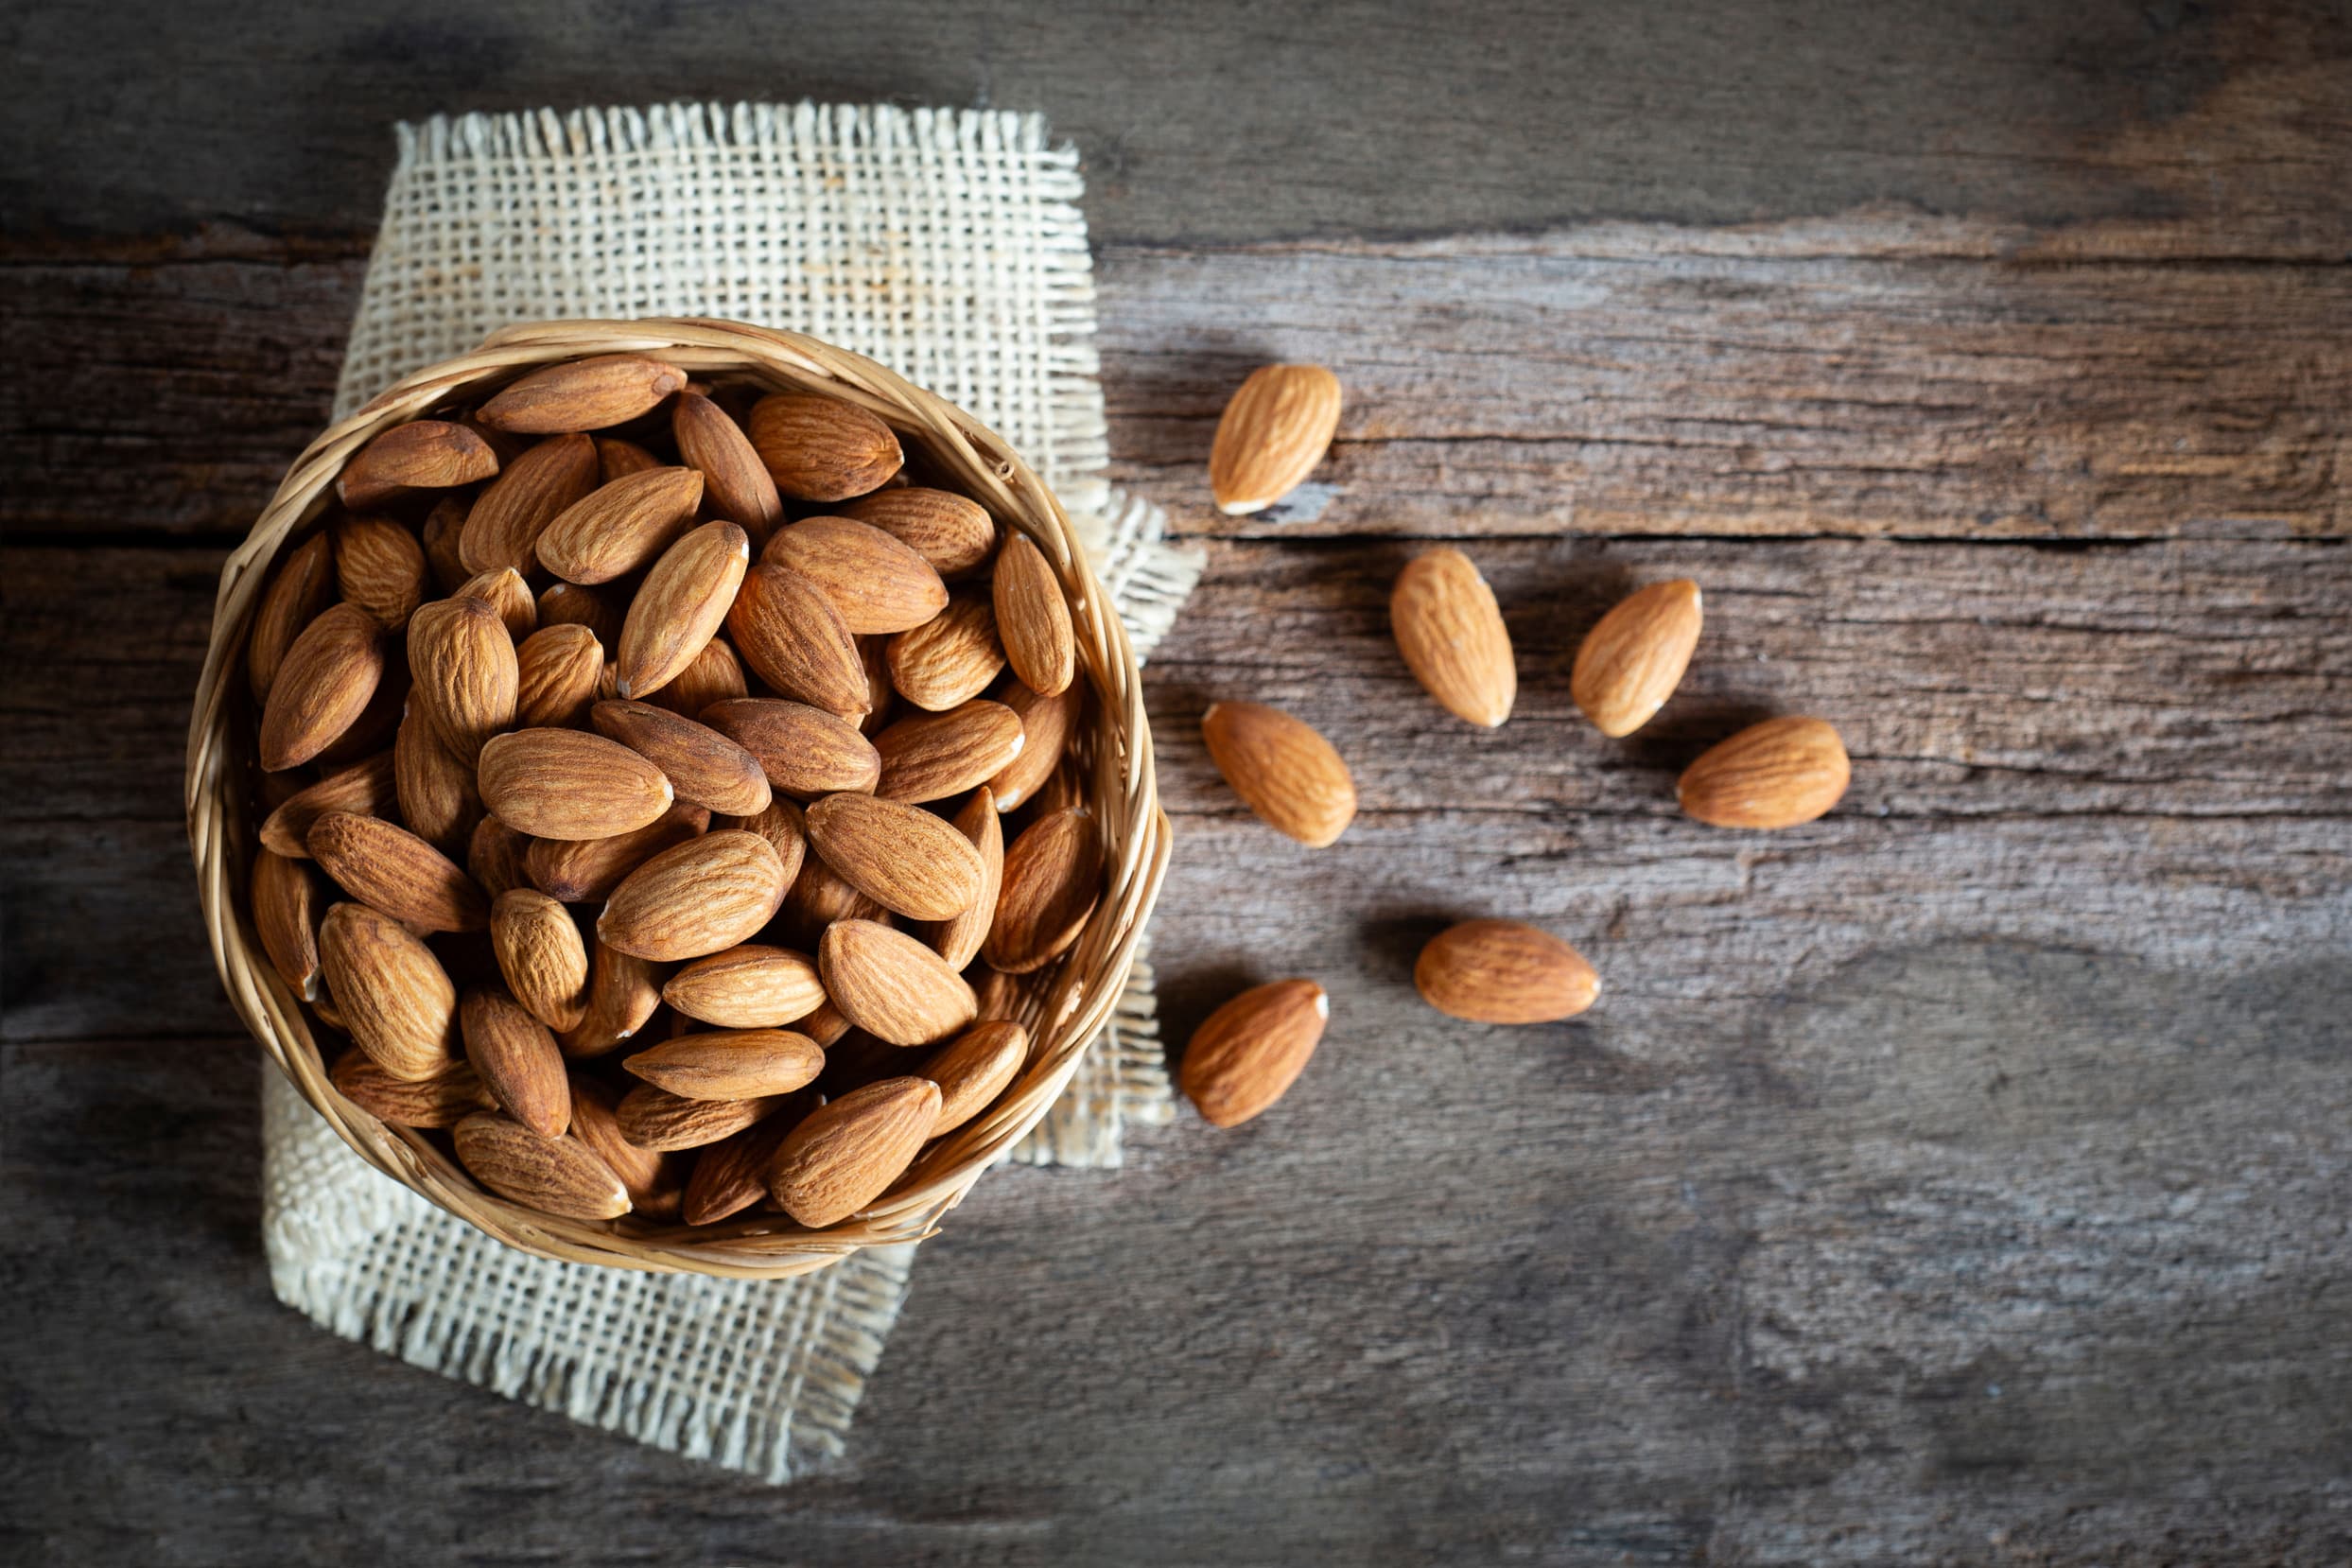 National Almond Day: 4 Healthy Almond Recipes to Satisfy Your Sweet Tooth